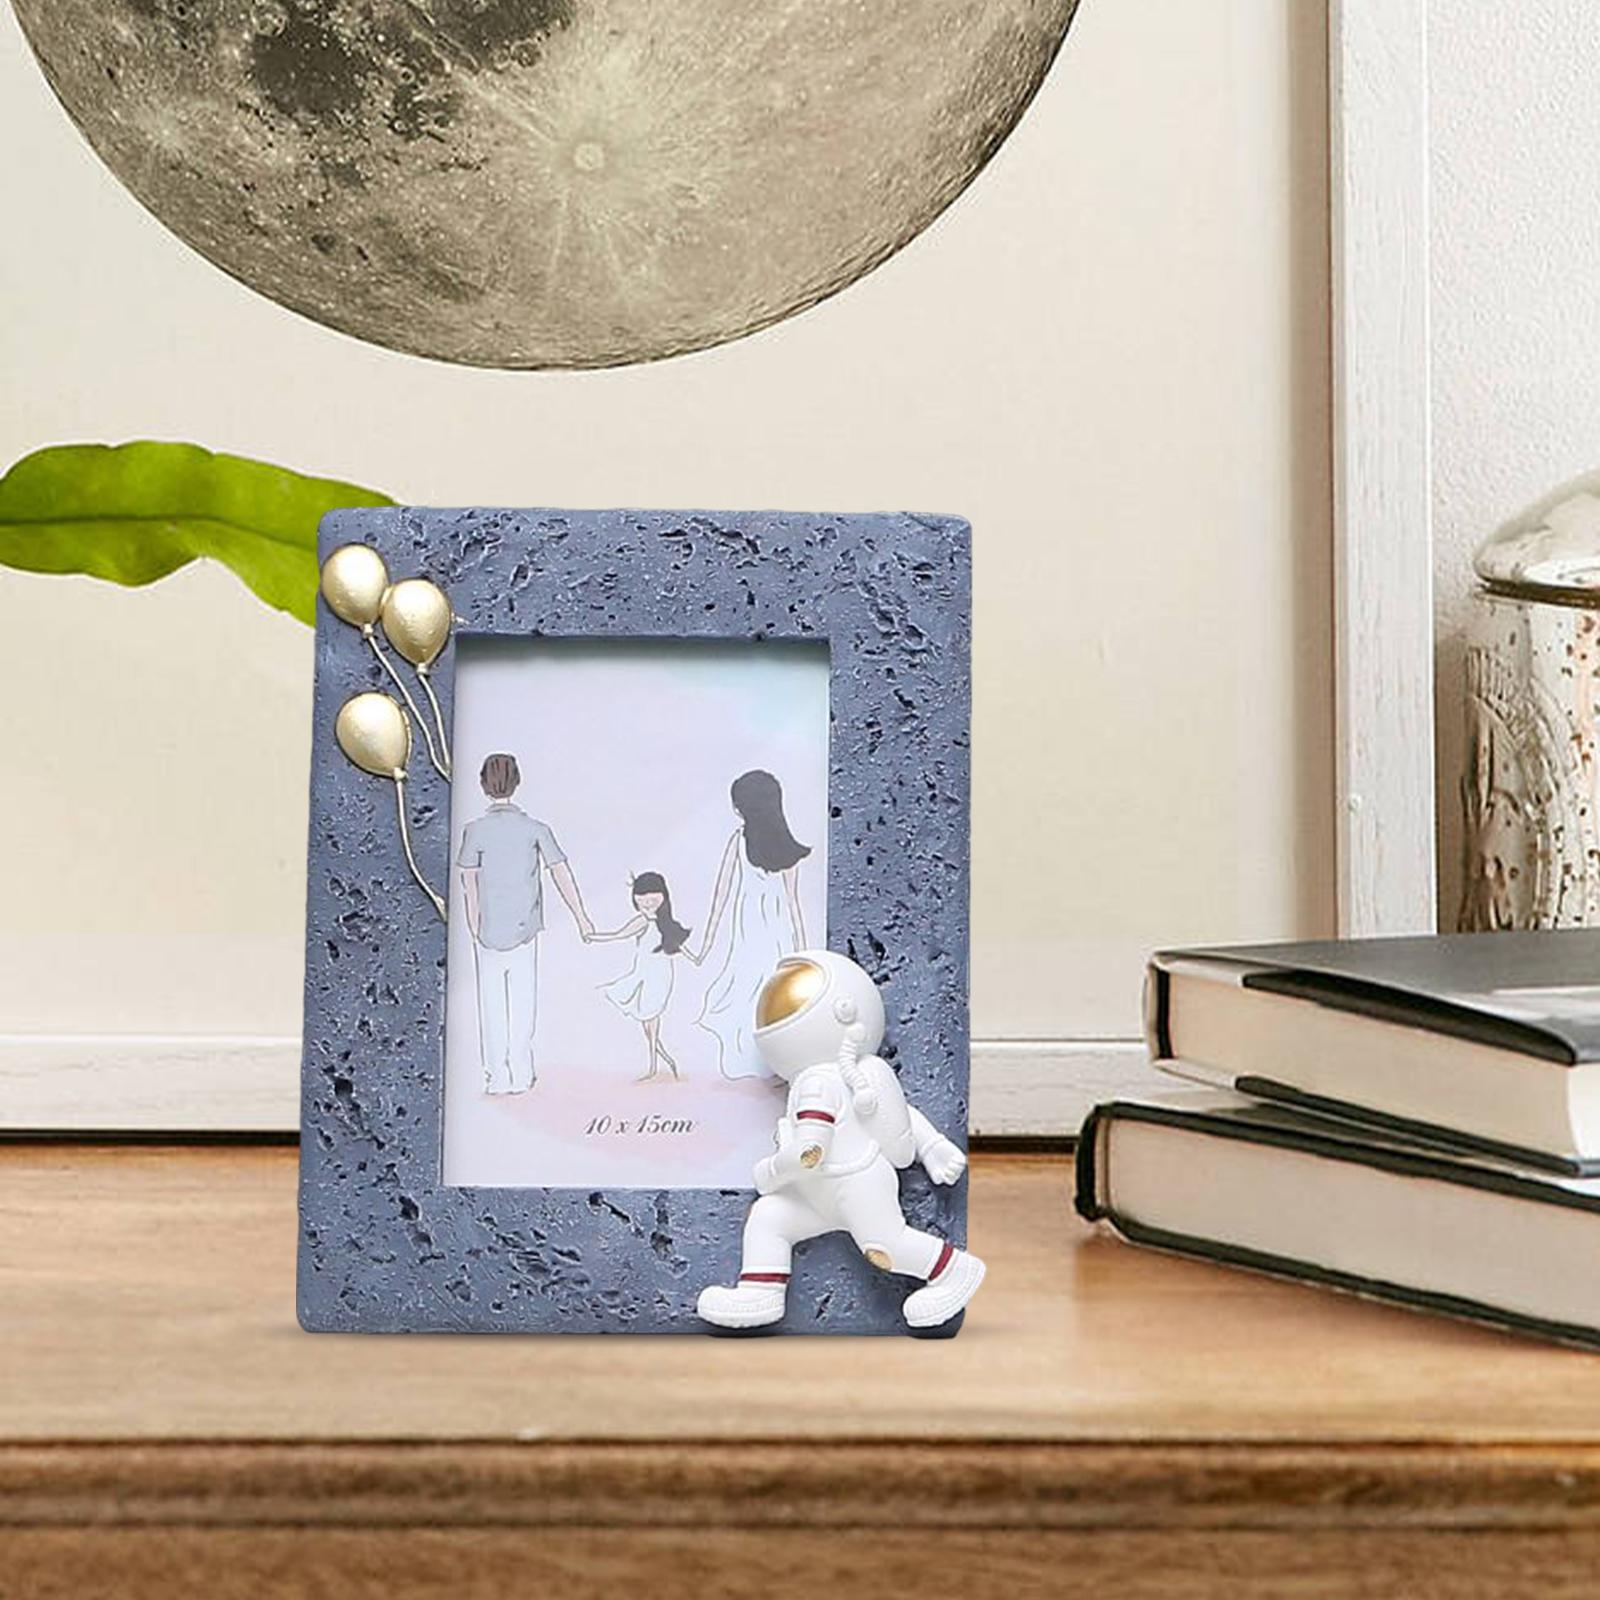 Resin Astronaut Photo Wall & Table Top Frames Photo Holder for Home 6inches